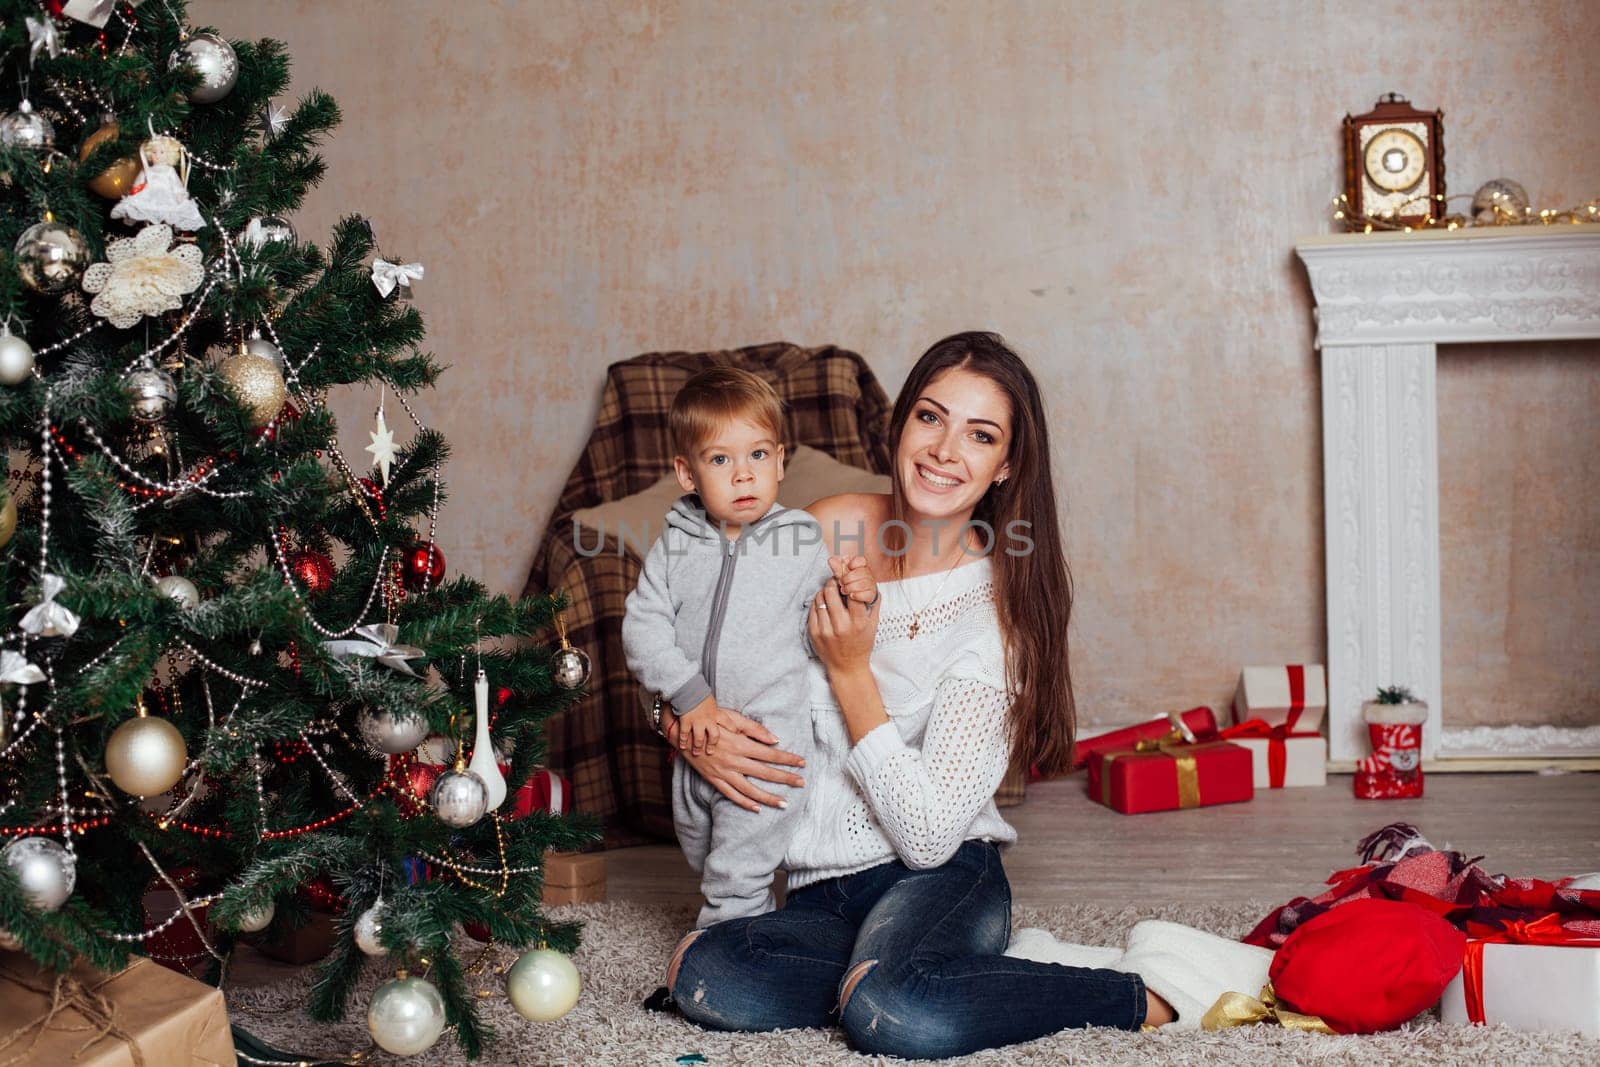 mother and little boy at Christmas tree with gifts